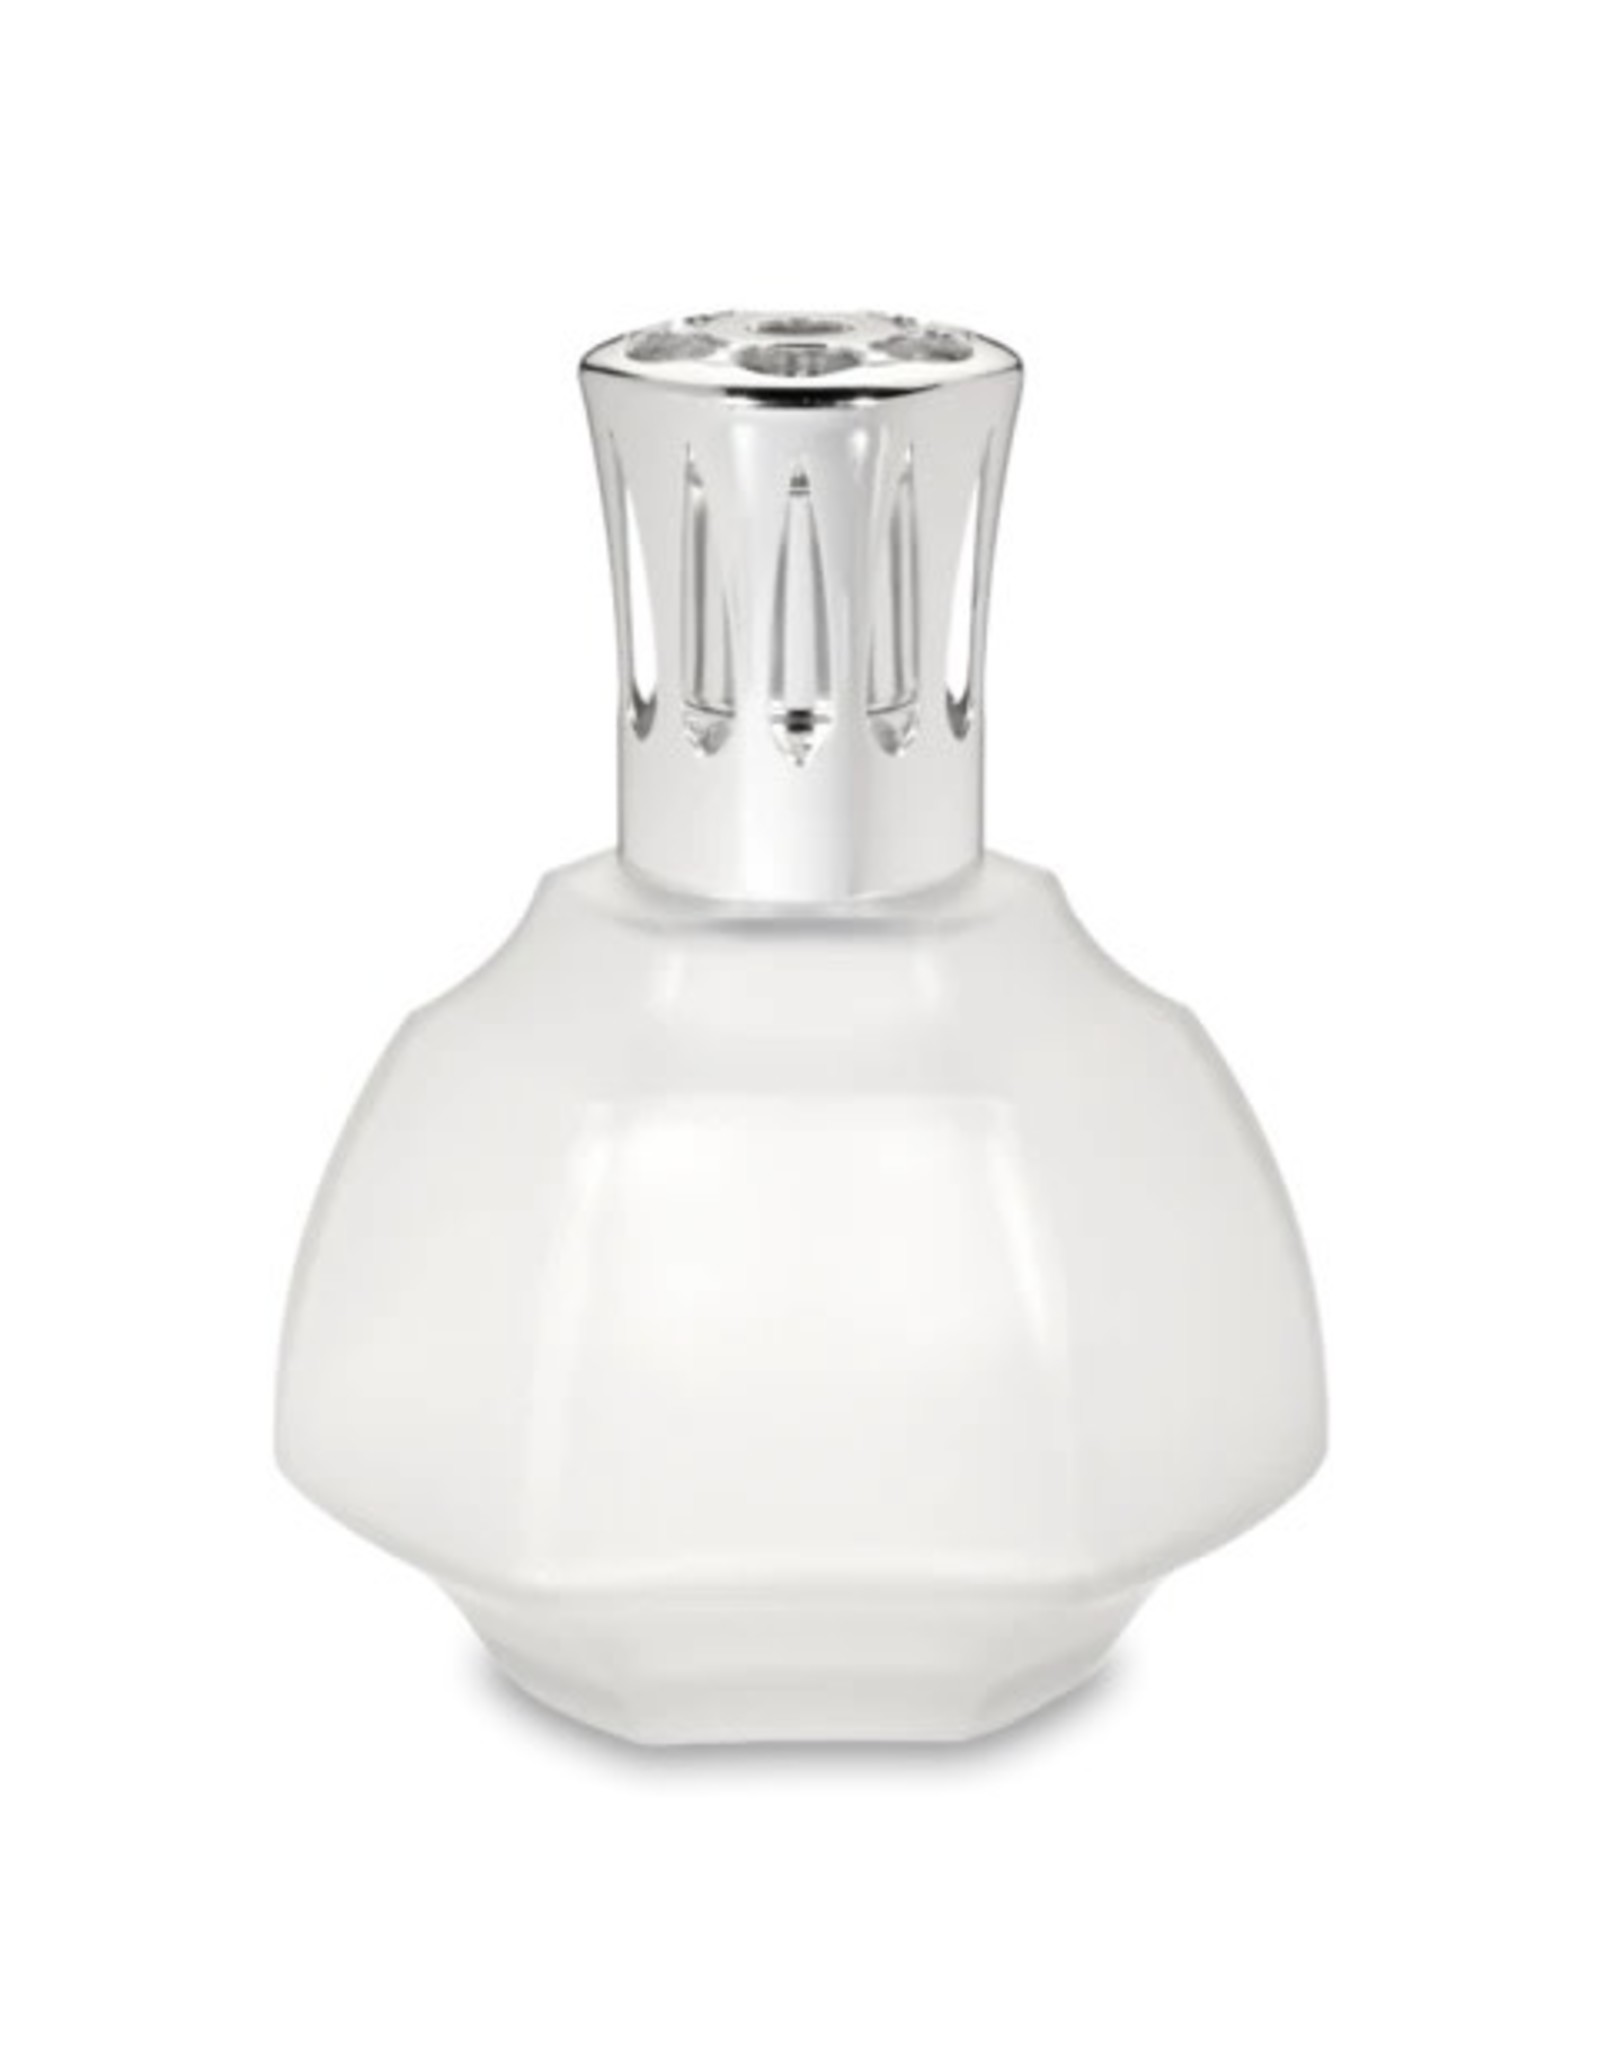 Maison Berger Haussmann Frosted White Lampe